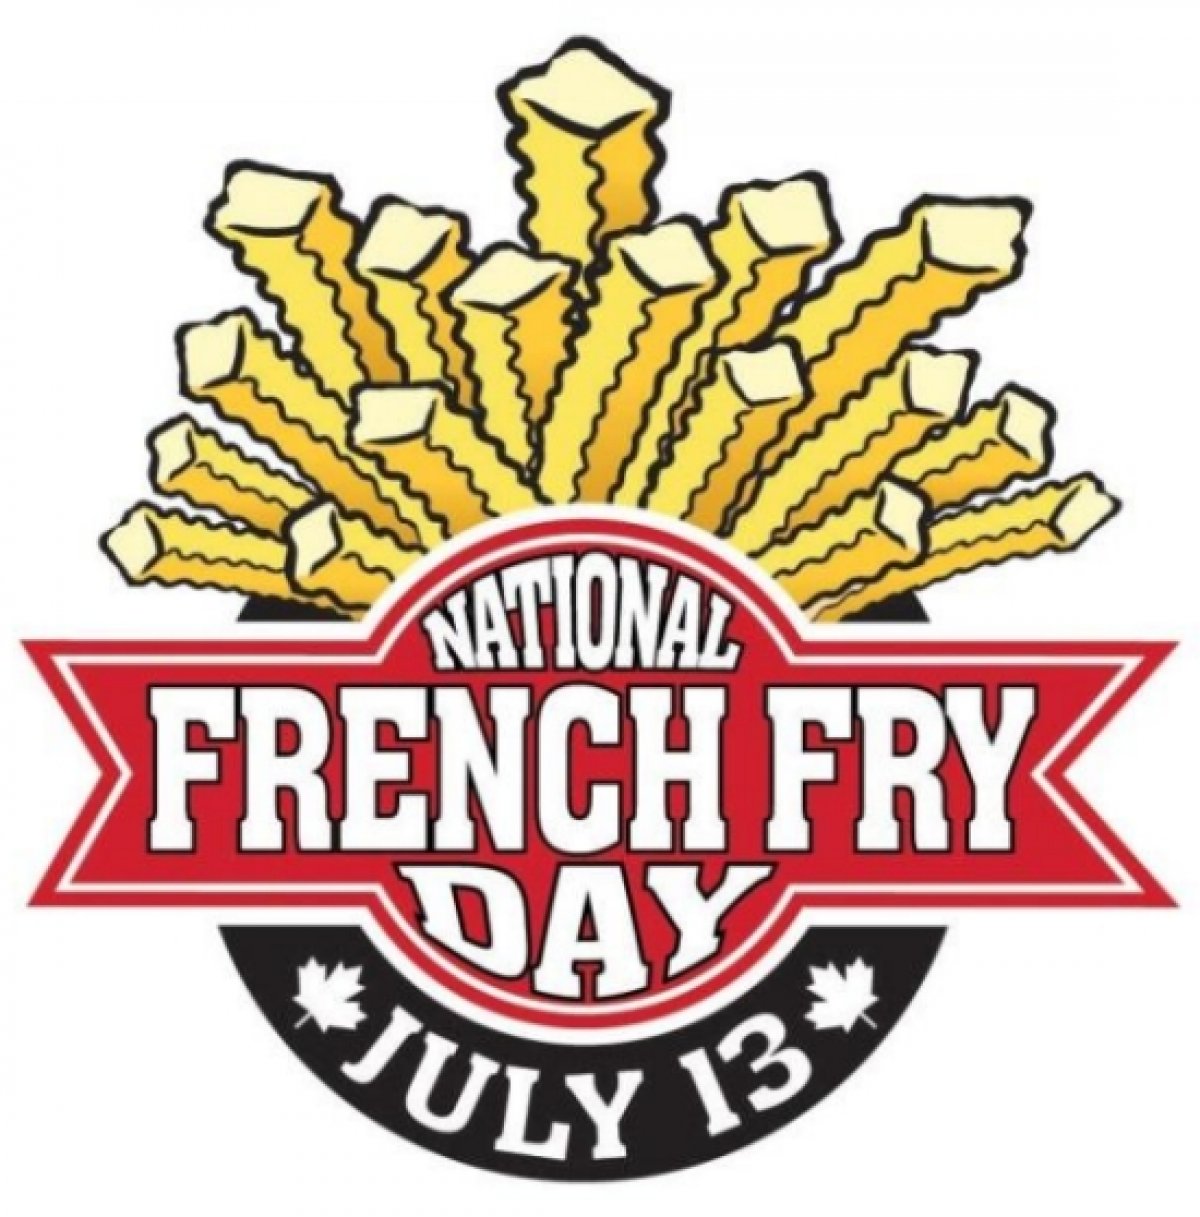 National French Fry day celebrated at Potato World in the French Fry